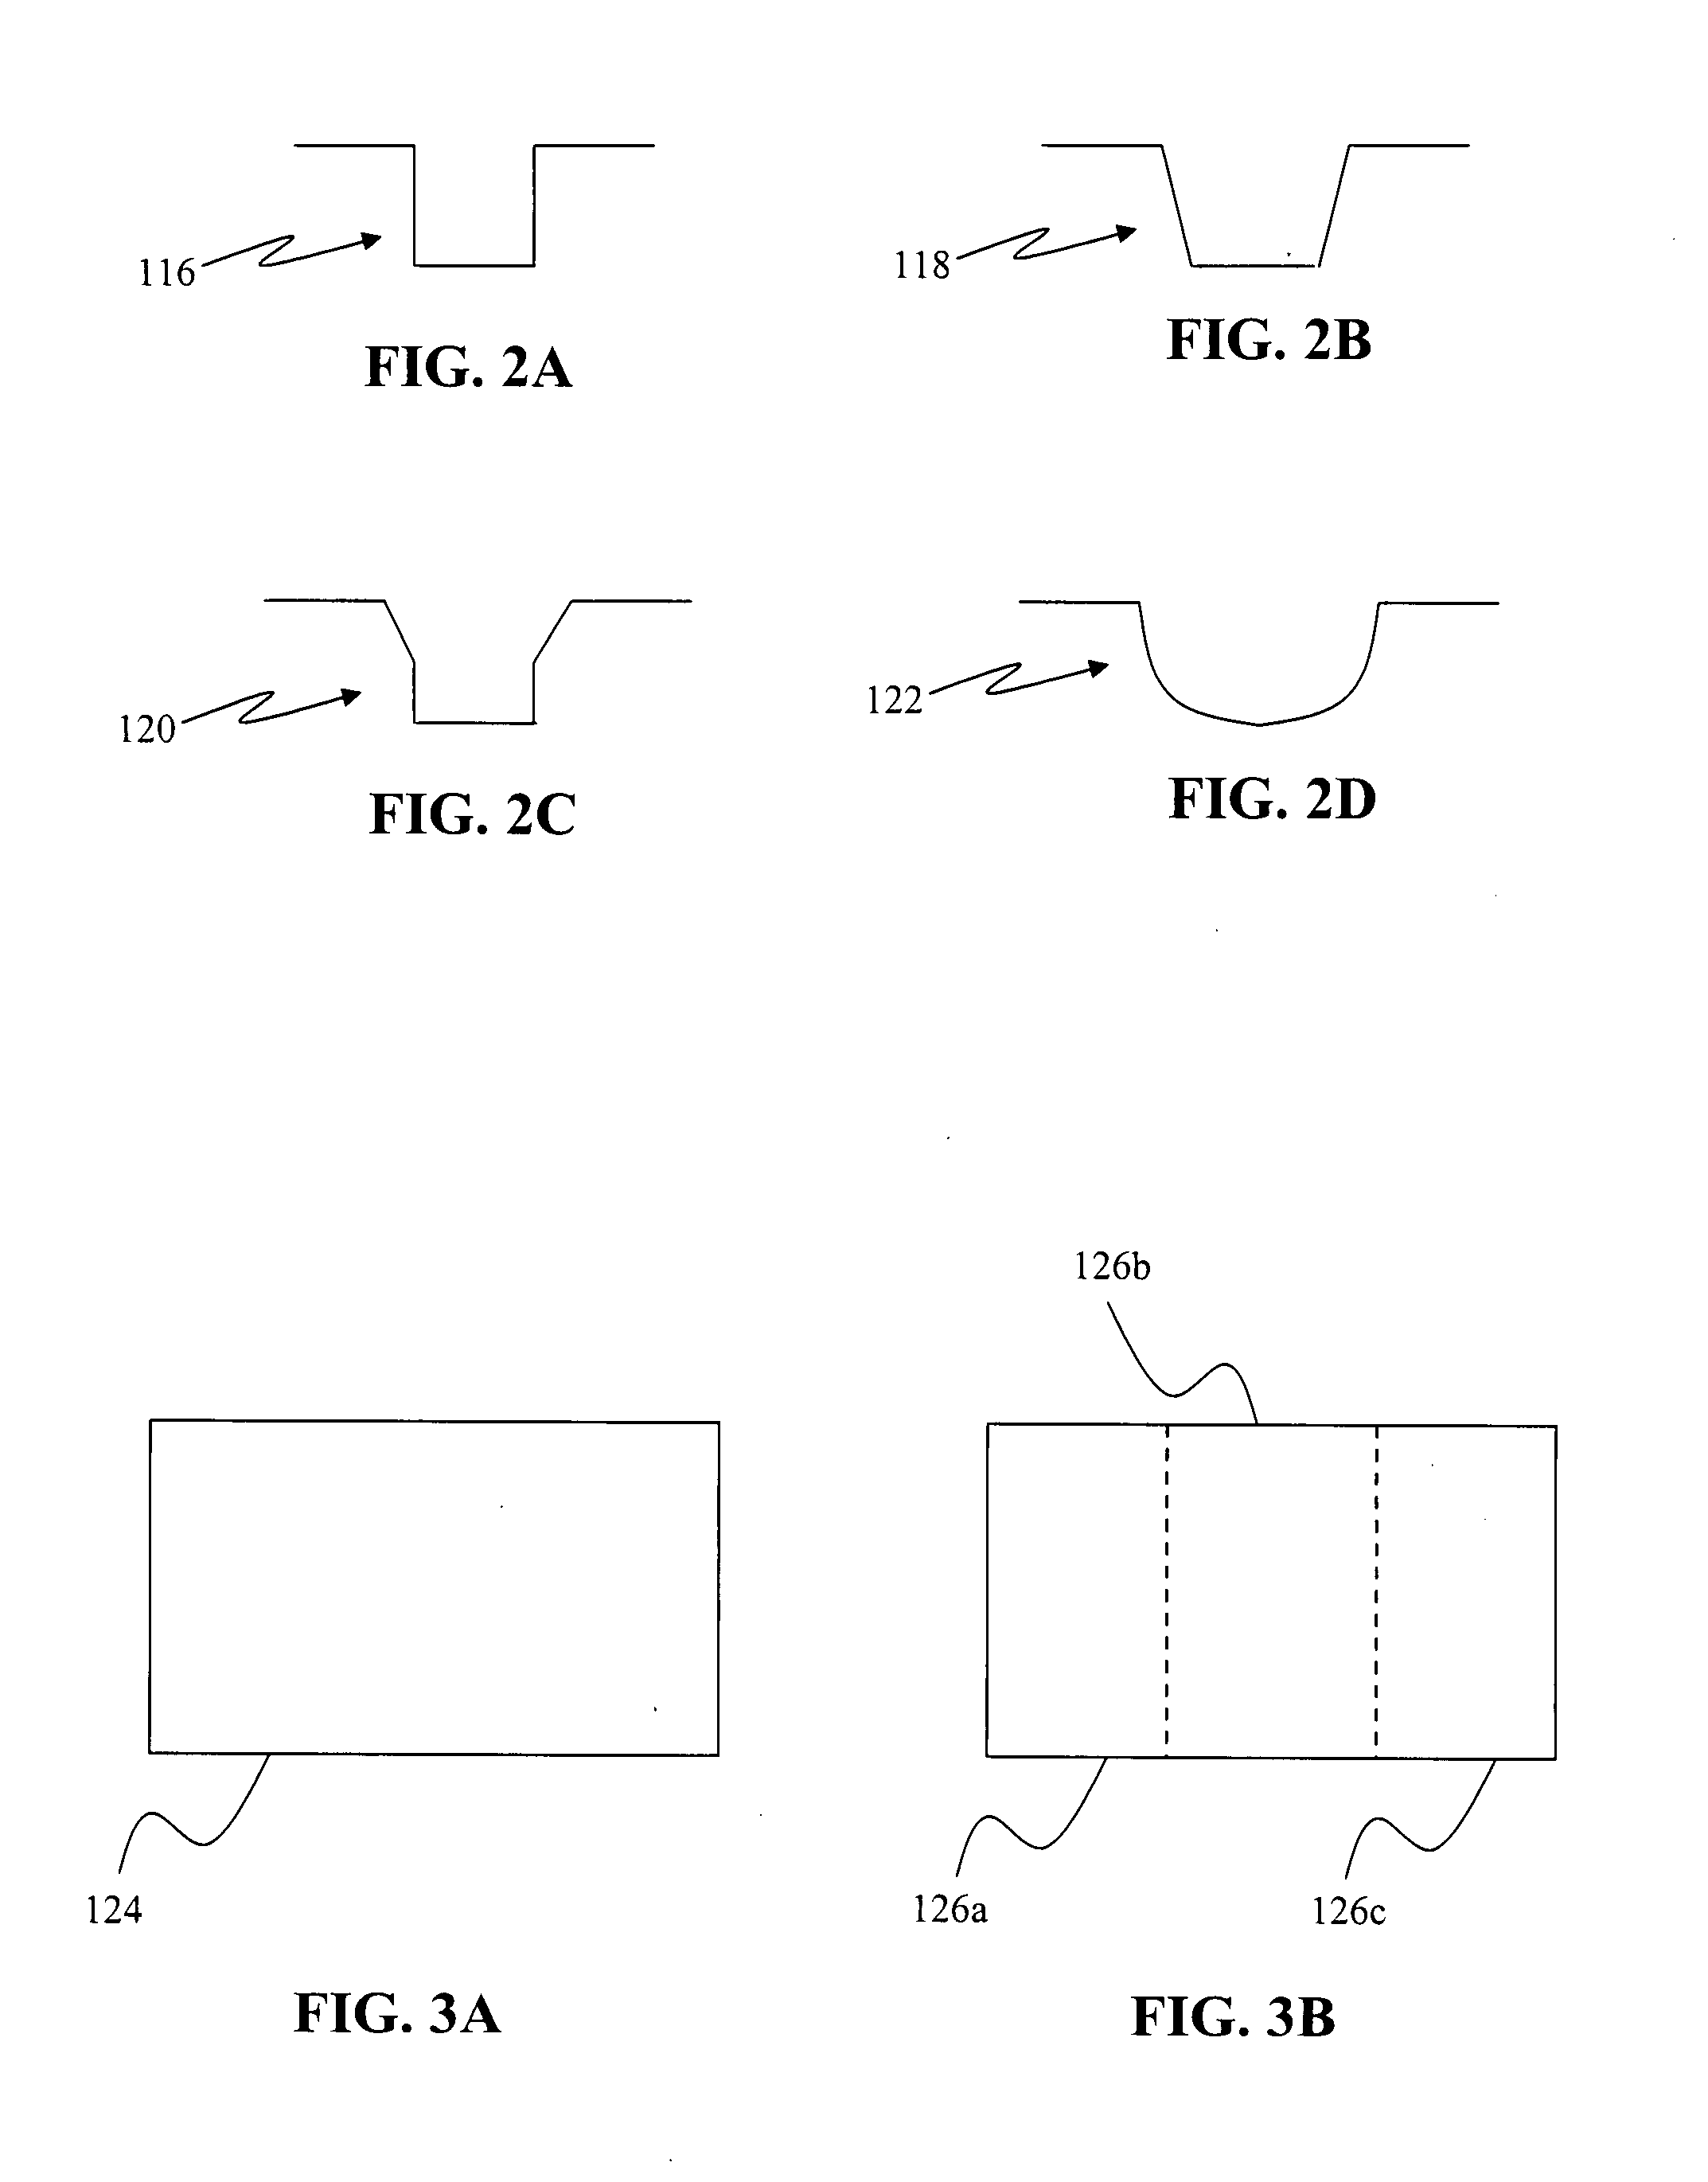 Patterned printing plates and processes for printing electrical elements